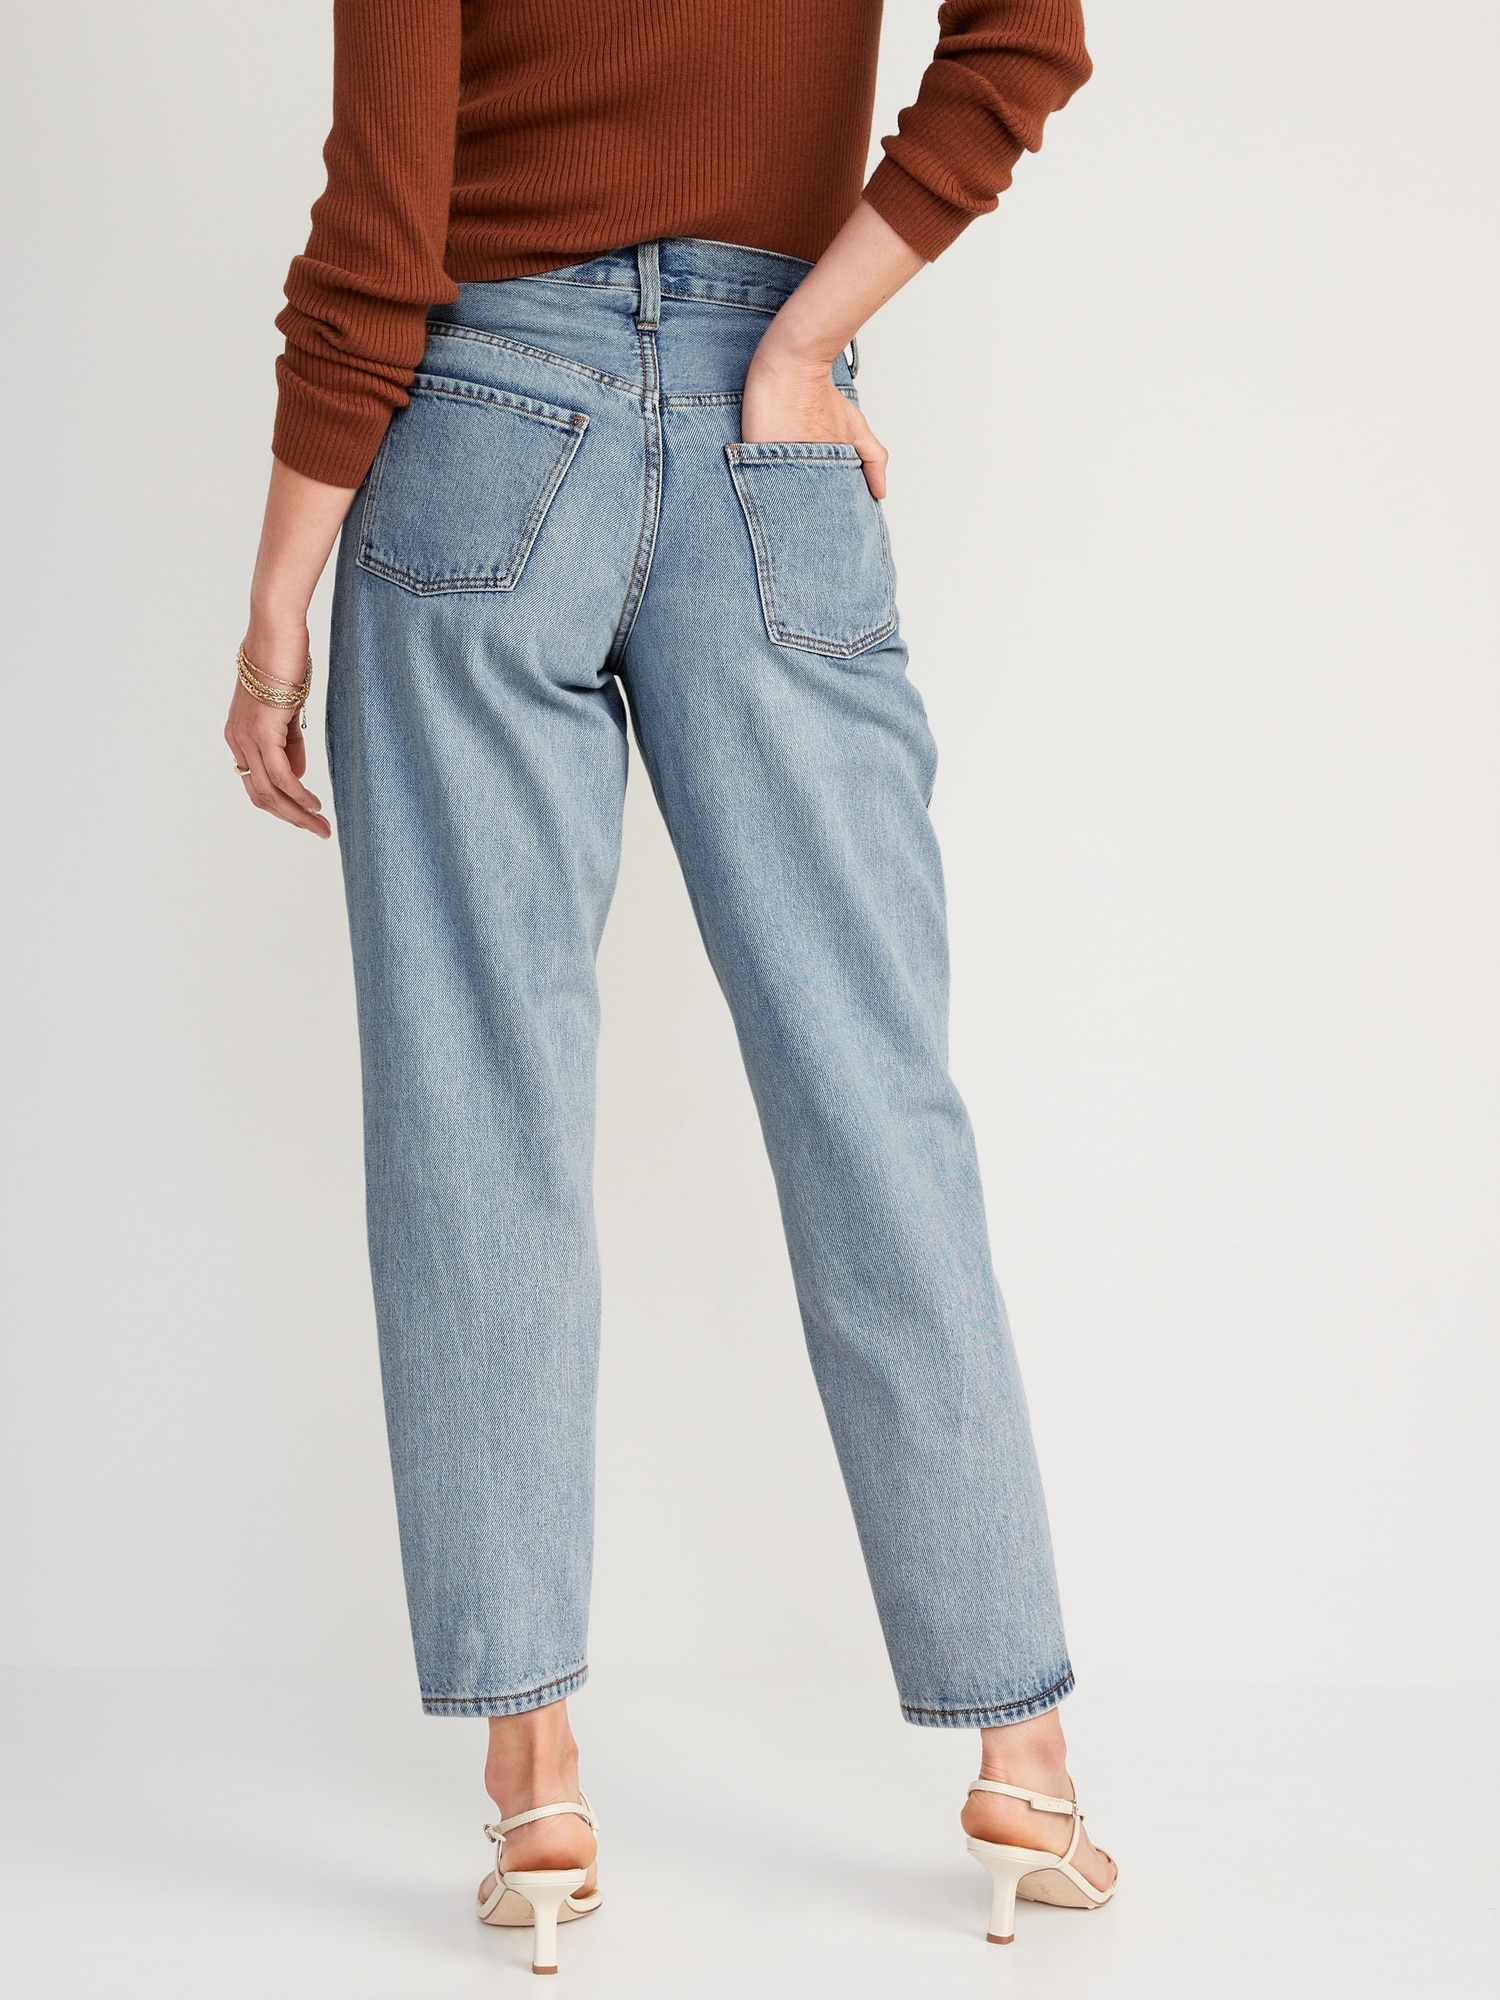 Extra High-Waisted Non-Stretch Balloon Jeans for Women | Old Navy